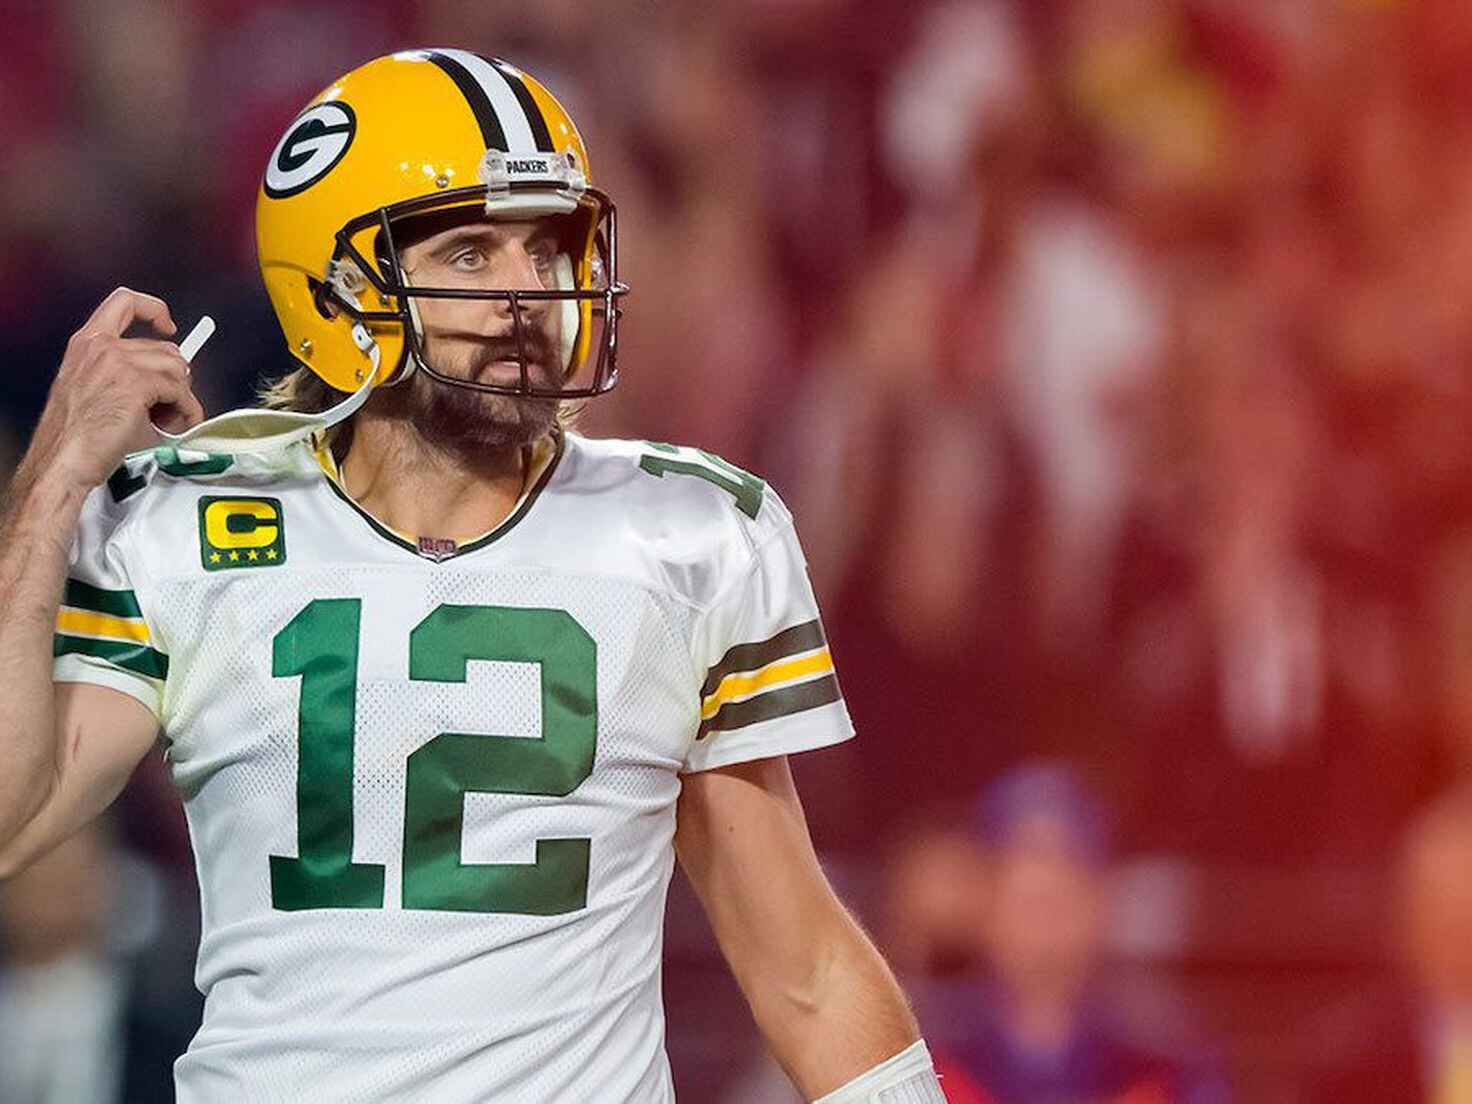 Rodgers says he'll play for the Packers in 2022